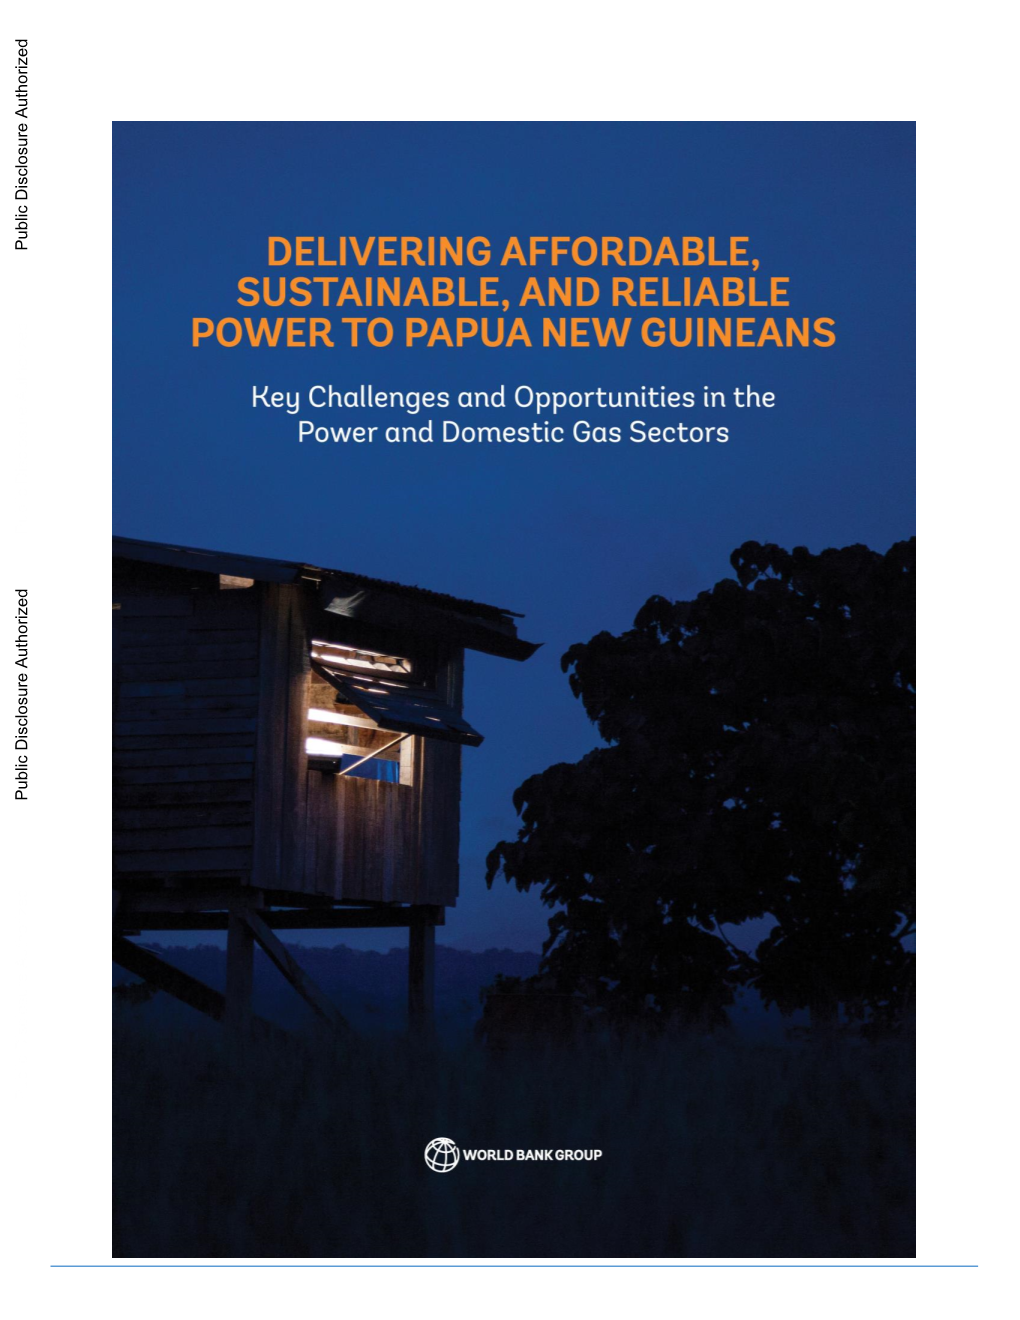 DELIVERING AFFORDABLE, SUSTAINABLE, and RELIABLE POWER to PAPUA NEW GUINEANS – Key Challenges and Opportunities in the Power and Domestic Gas Sectors